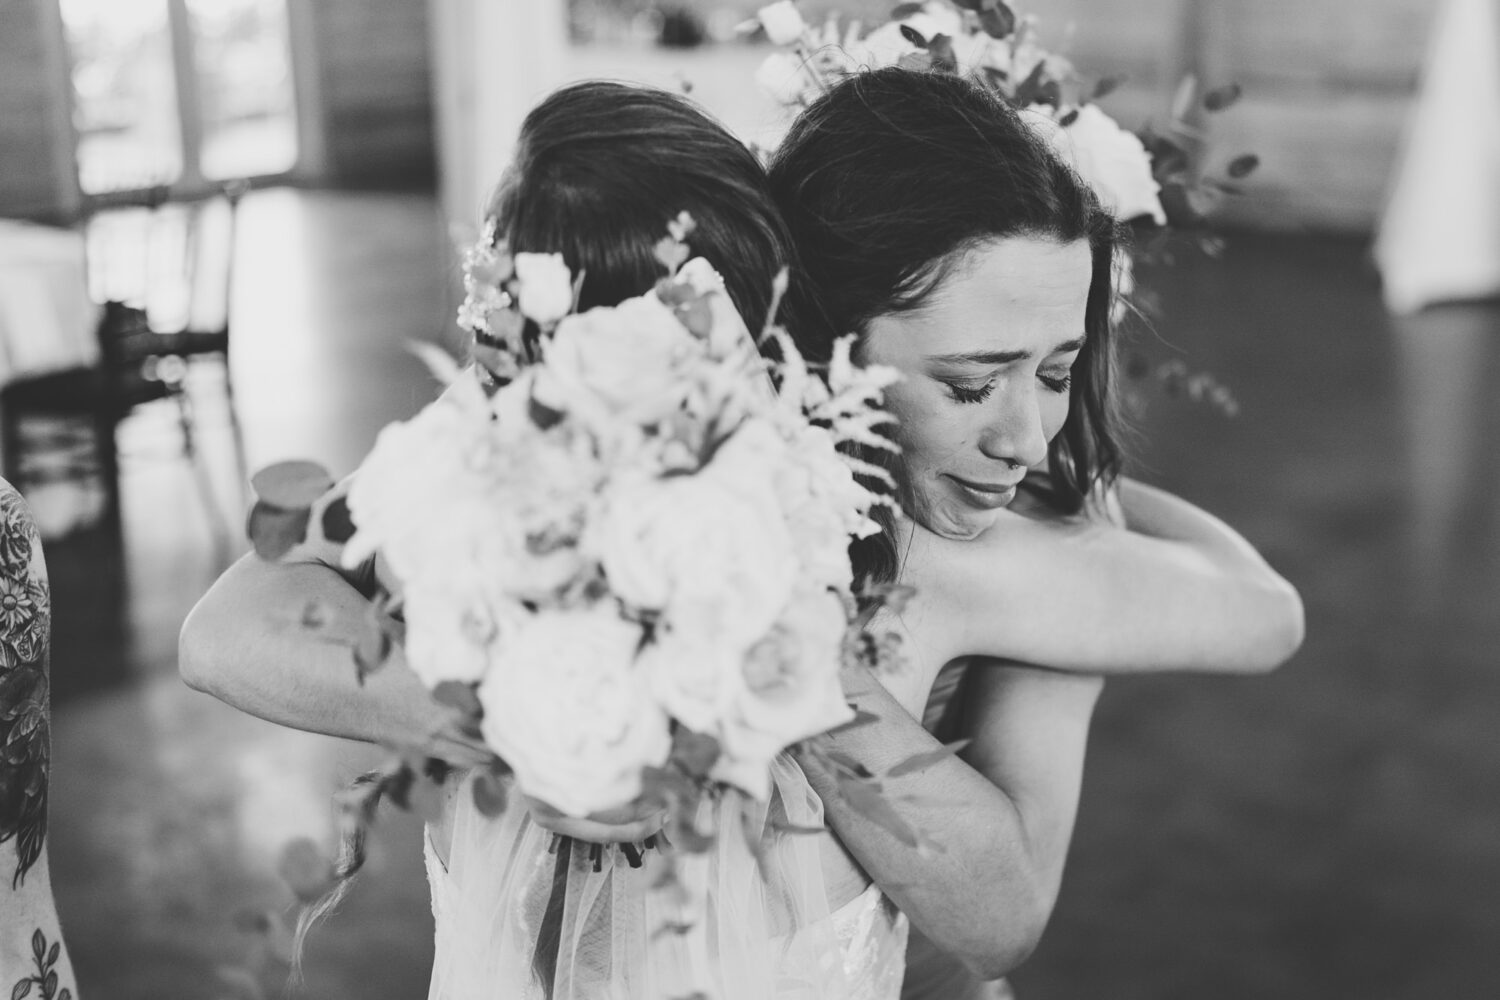 bride and bridesmaid share an emotional hug after the wedding ceremony concludes